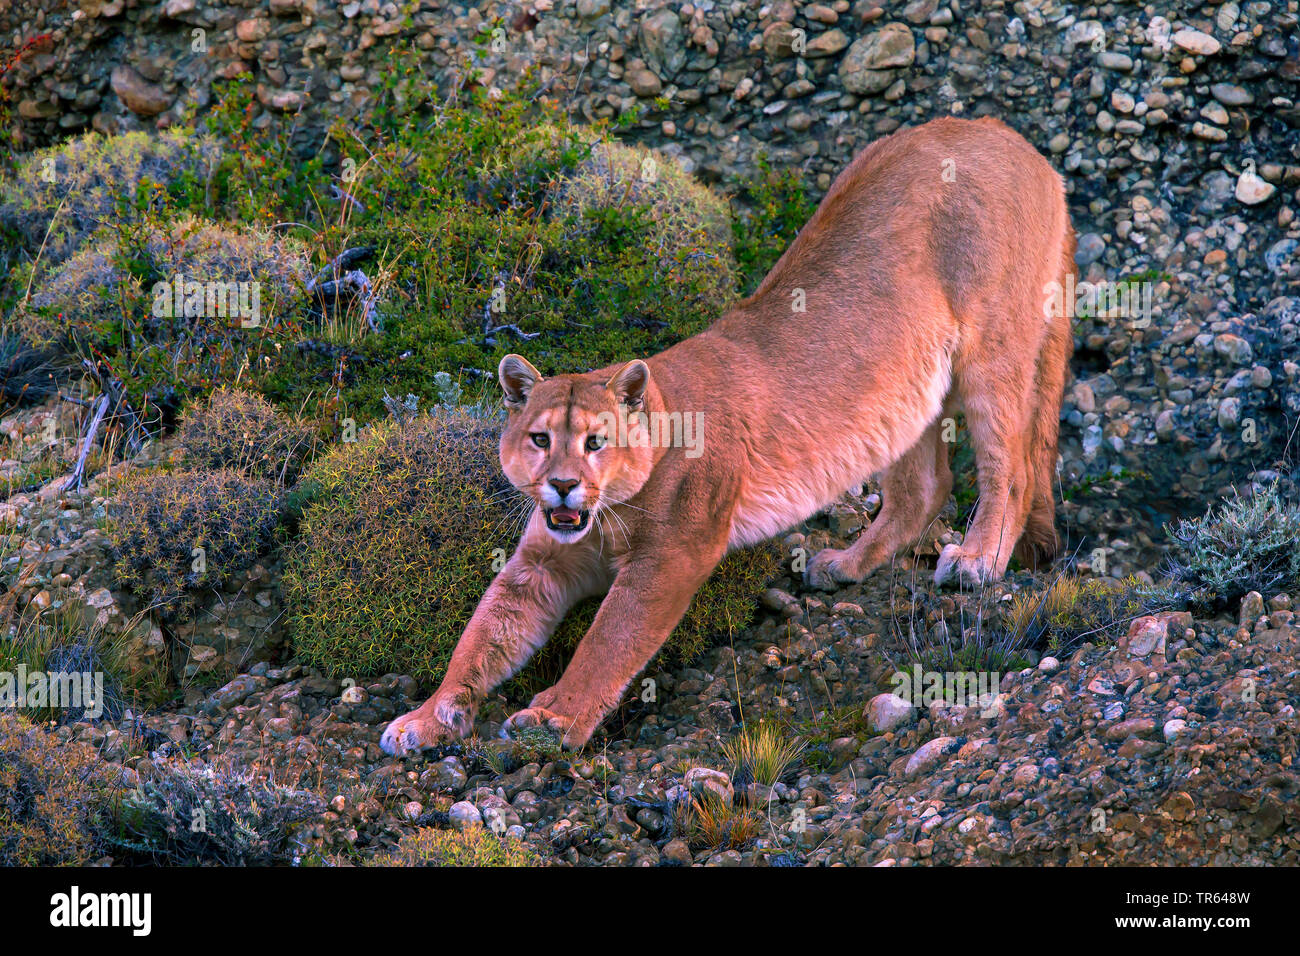 South American cougar , Puma, Mountain Cougar (Puma concolor puma, Puma concolor patagonica, Puma patagonica, Puma concolor, Profelis concolor, Felis concolor, Felis concolor patagonica), stretching, Chile, Torres del Paine National